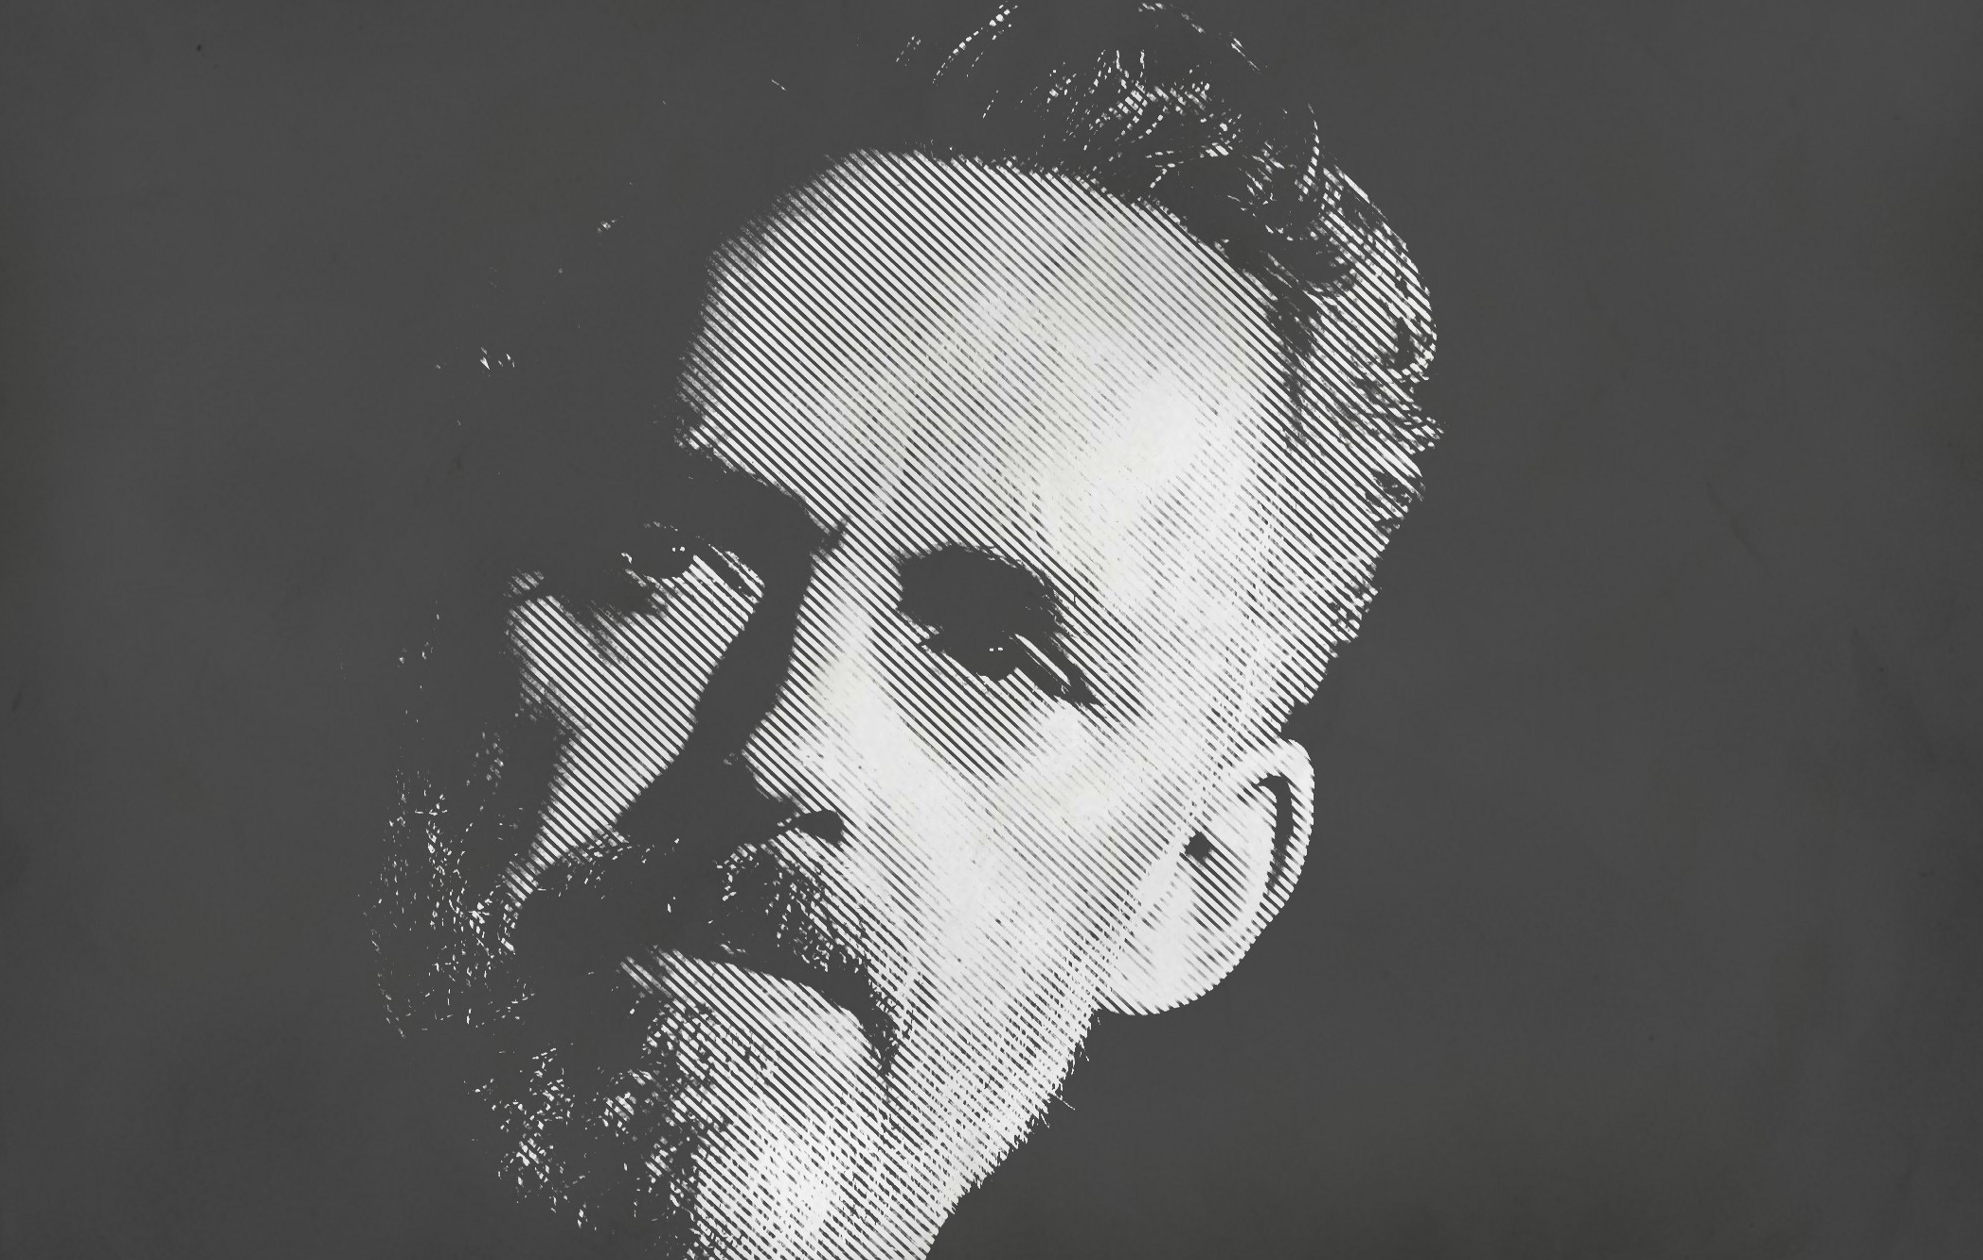 Jordan Peterson's Antidote To Chaos | by Justin Lee | Arc Digital